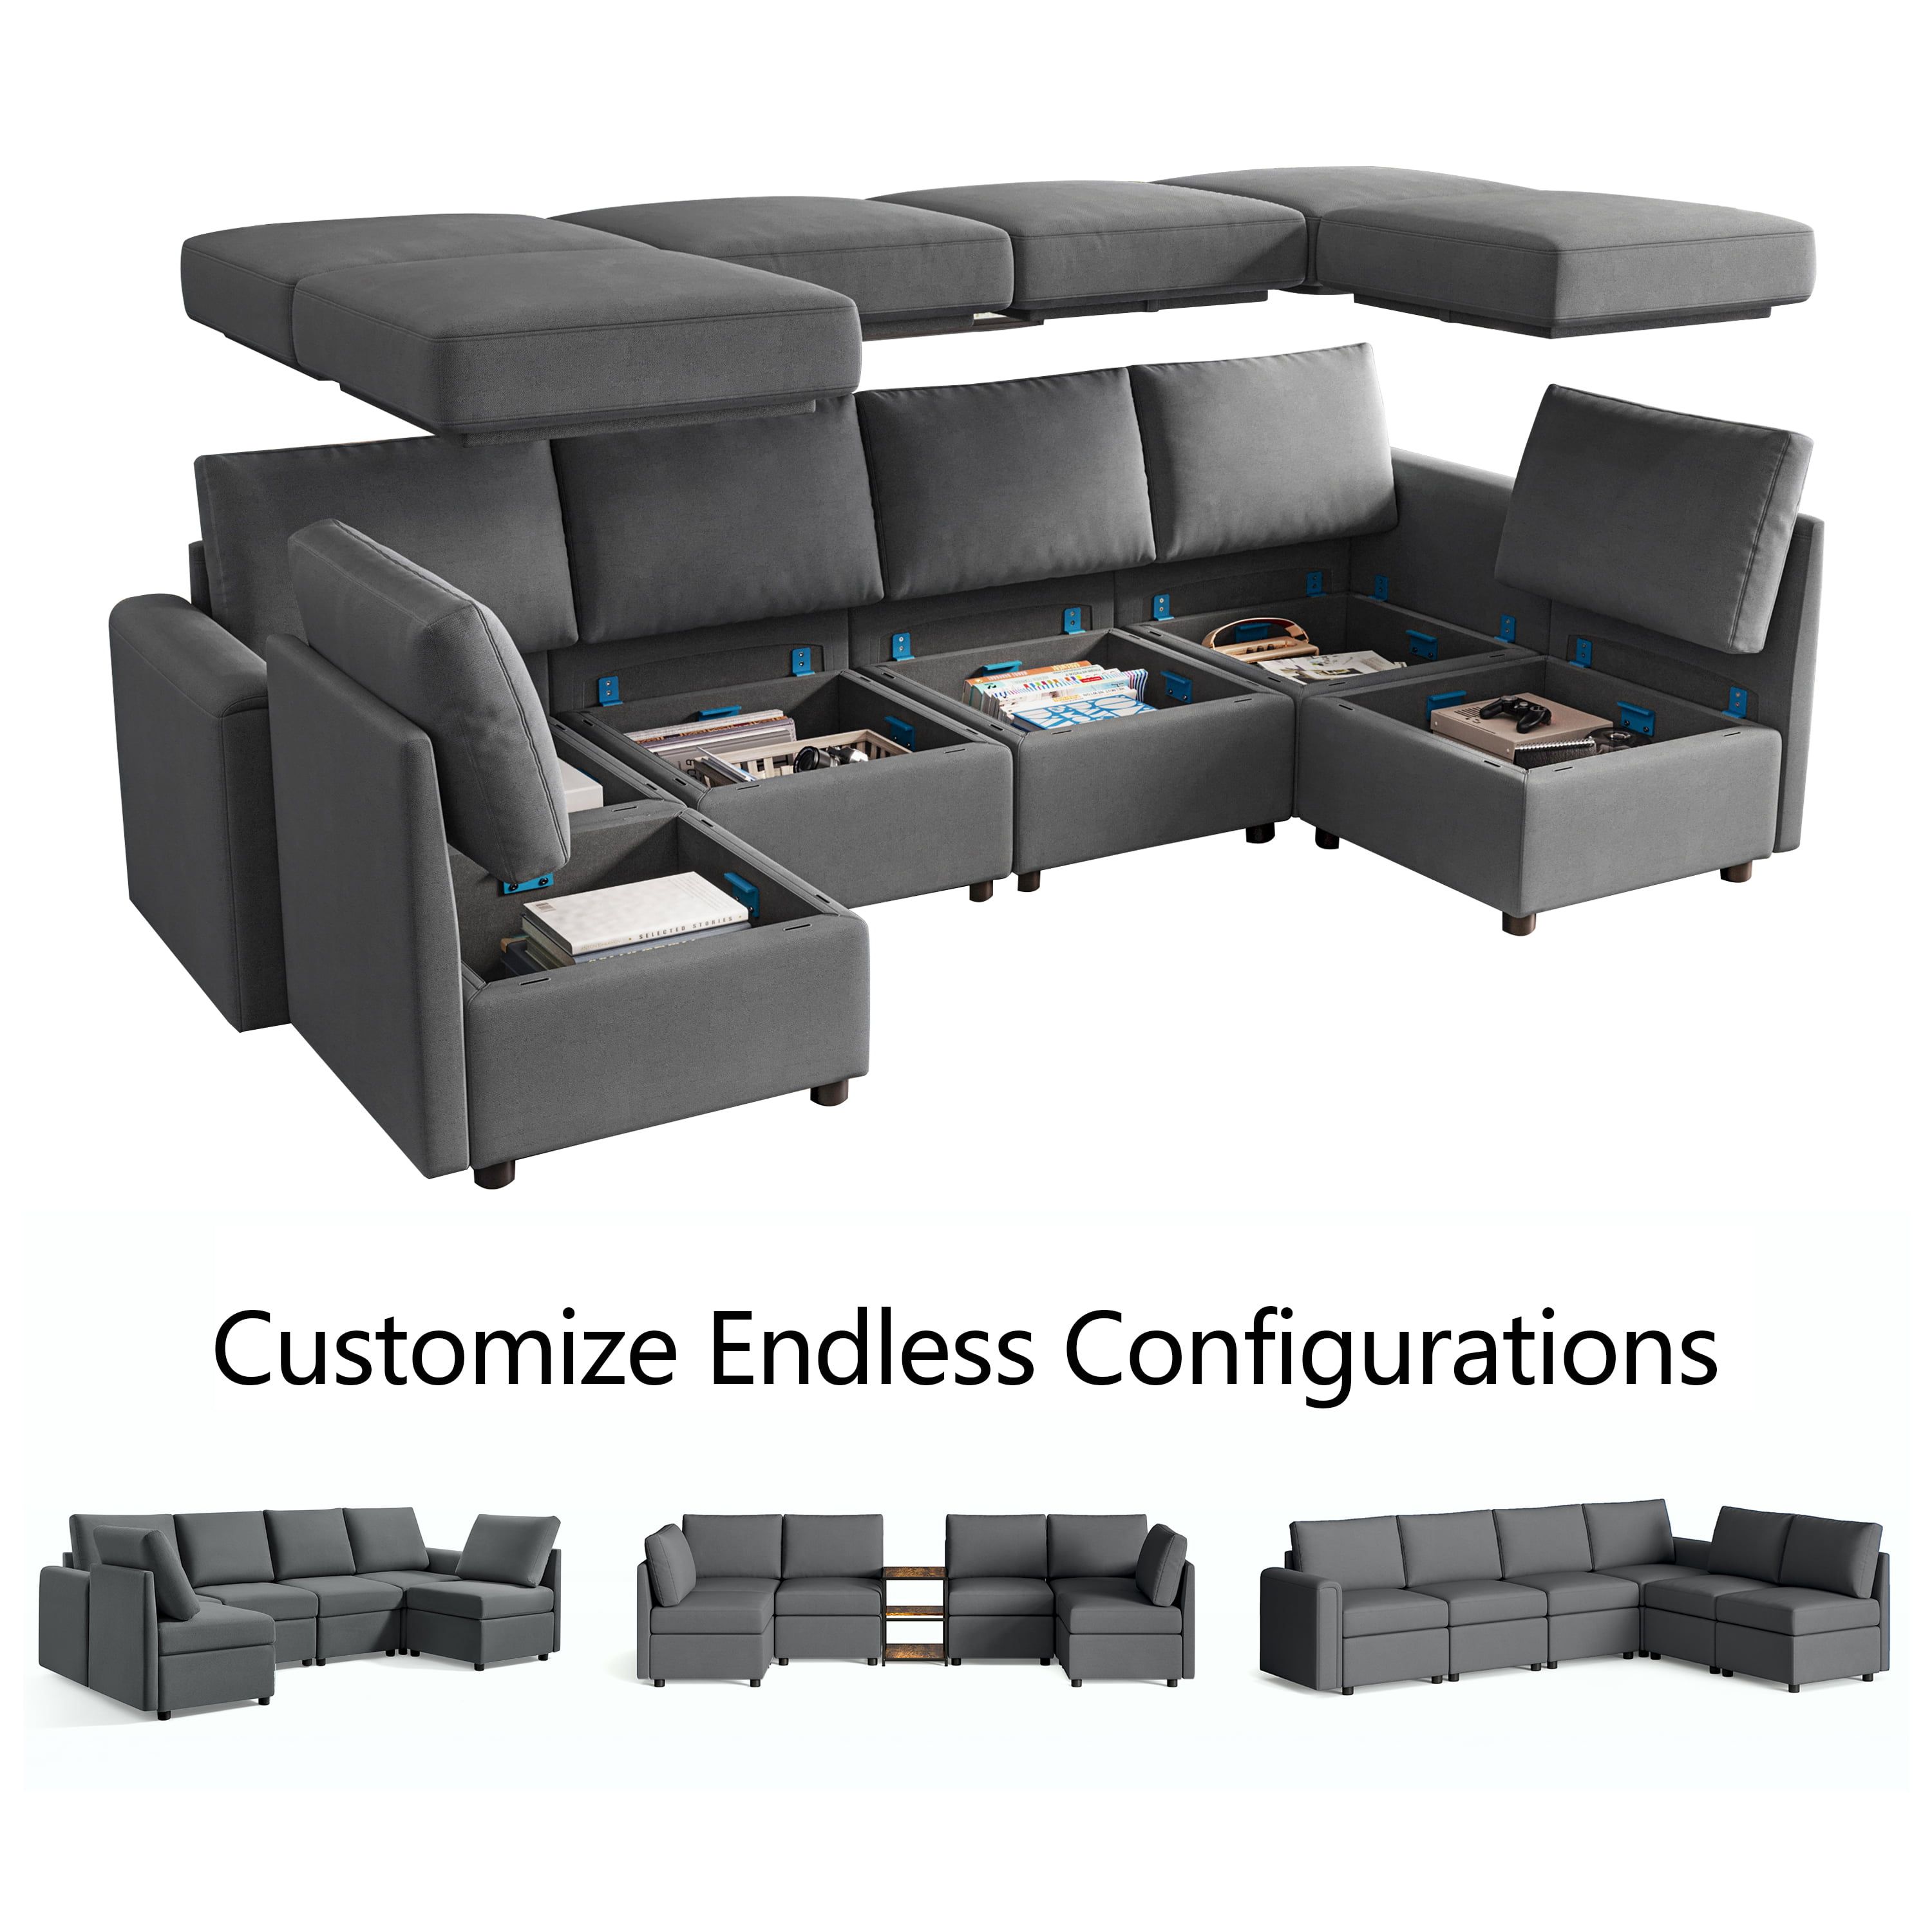 Linsy Home Modular Couches And Sofas Sectional With Storage Sectional Sofa  U Shaped Sectional Couch With Reversible Chaises, Dark Gray – Walmart With Regard To Sectional Sofa With Storage (View 9 of 20)